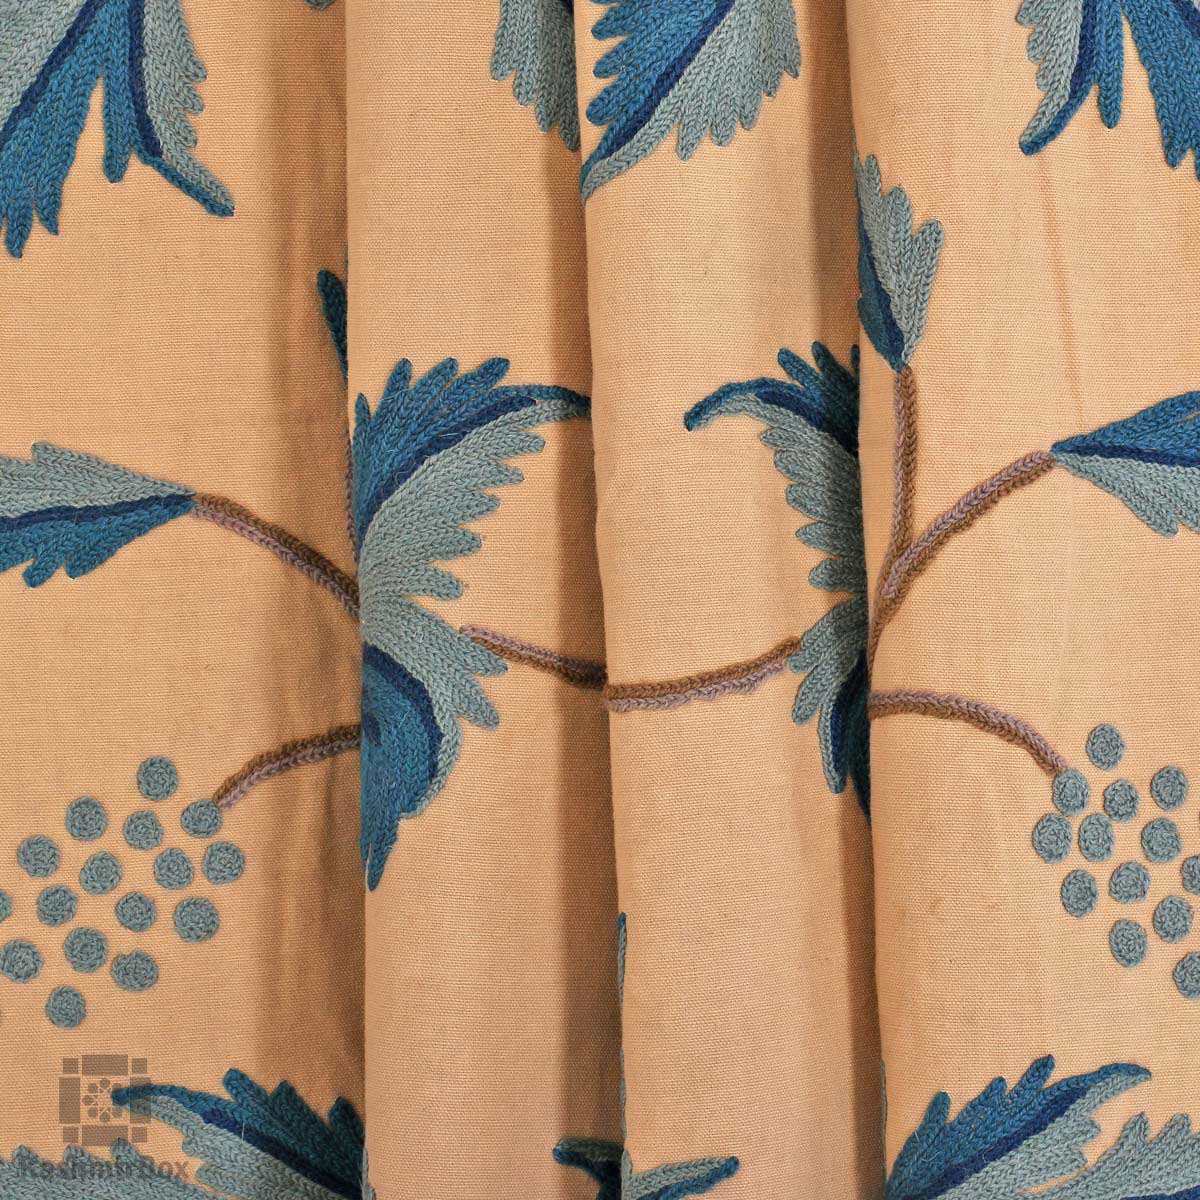 Whitish Blue Flowery Crewel Embroidered Curtain - KashmirBox.com